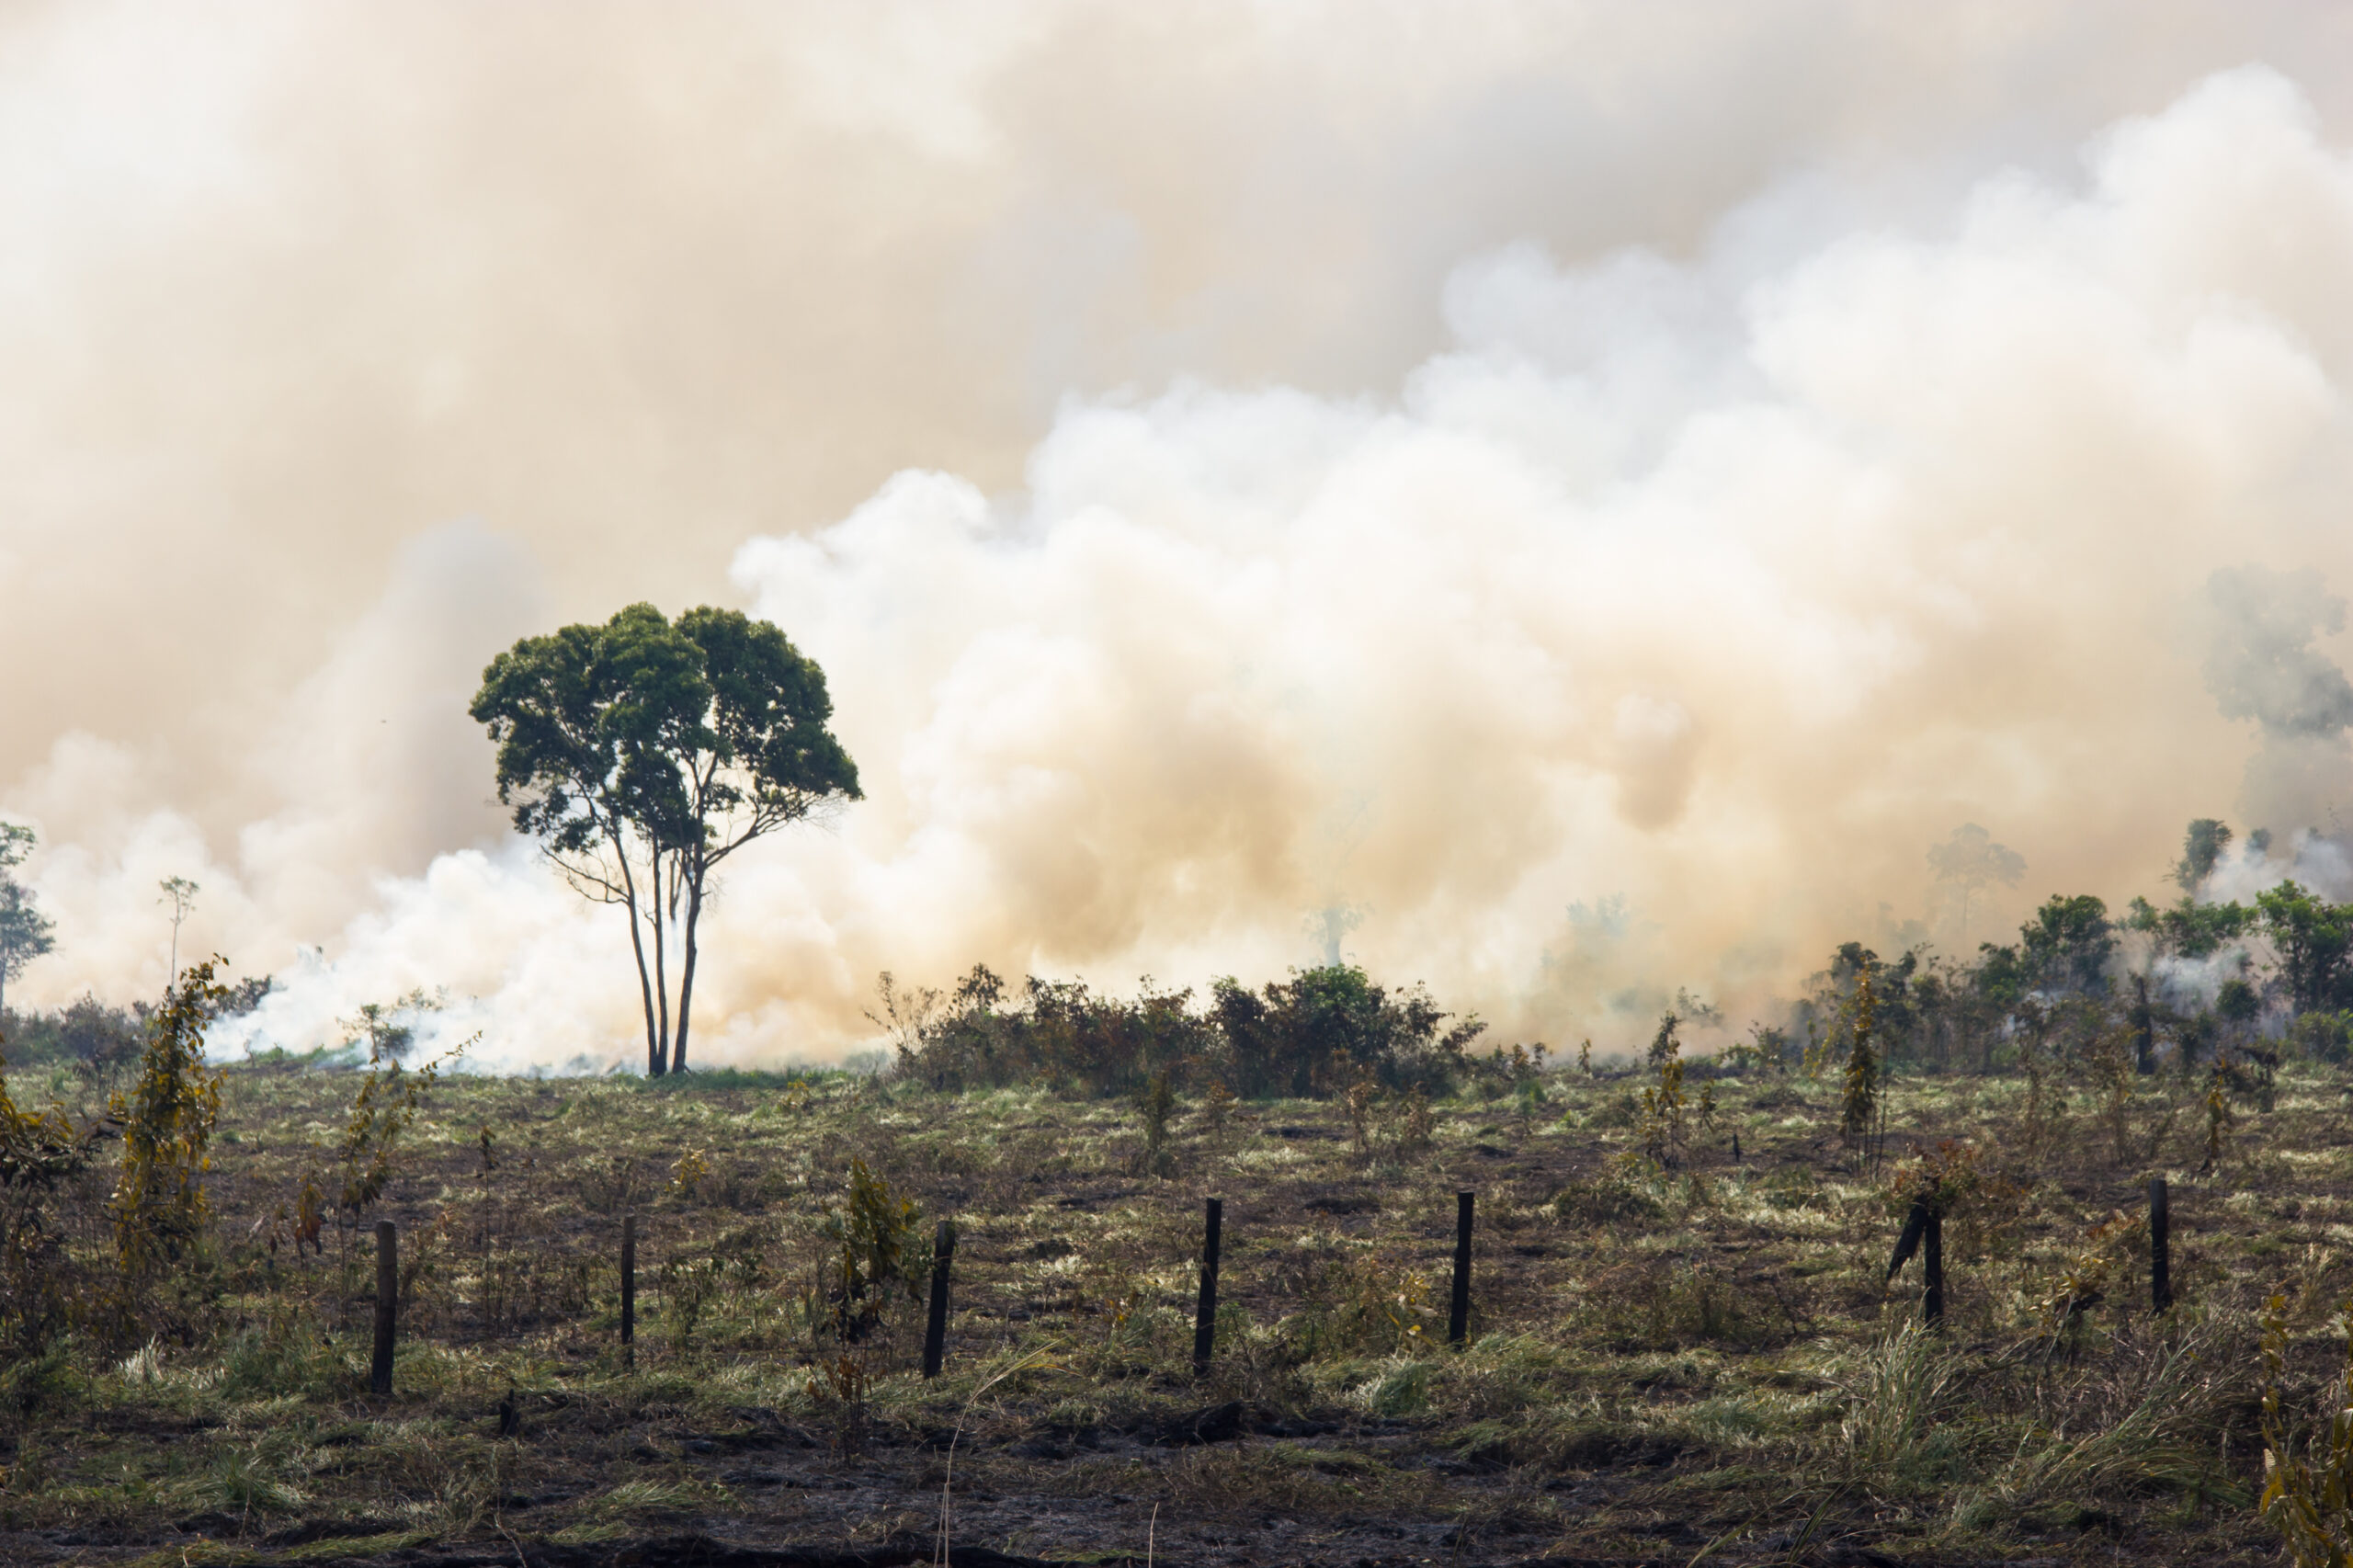 Amazonia Forest burning to open space for pasture